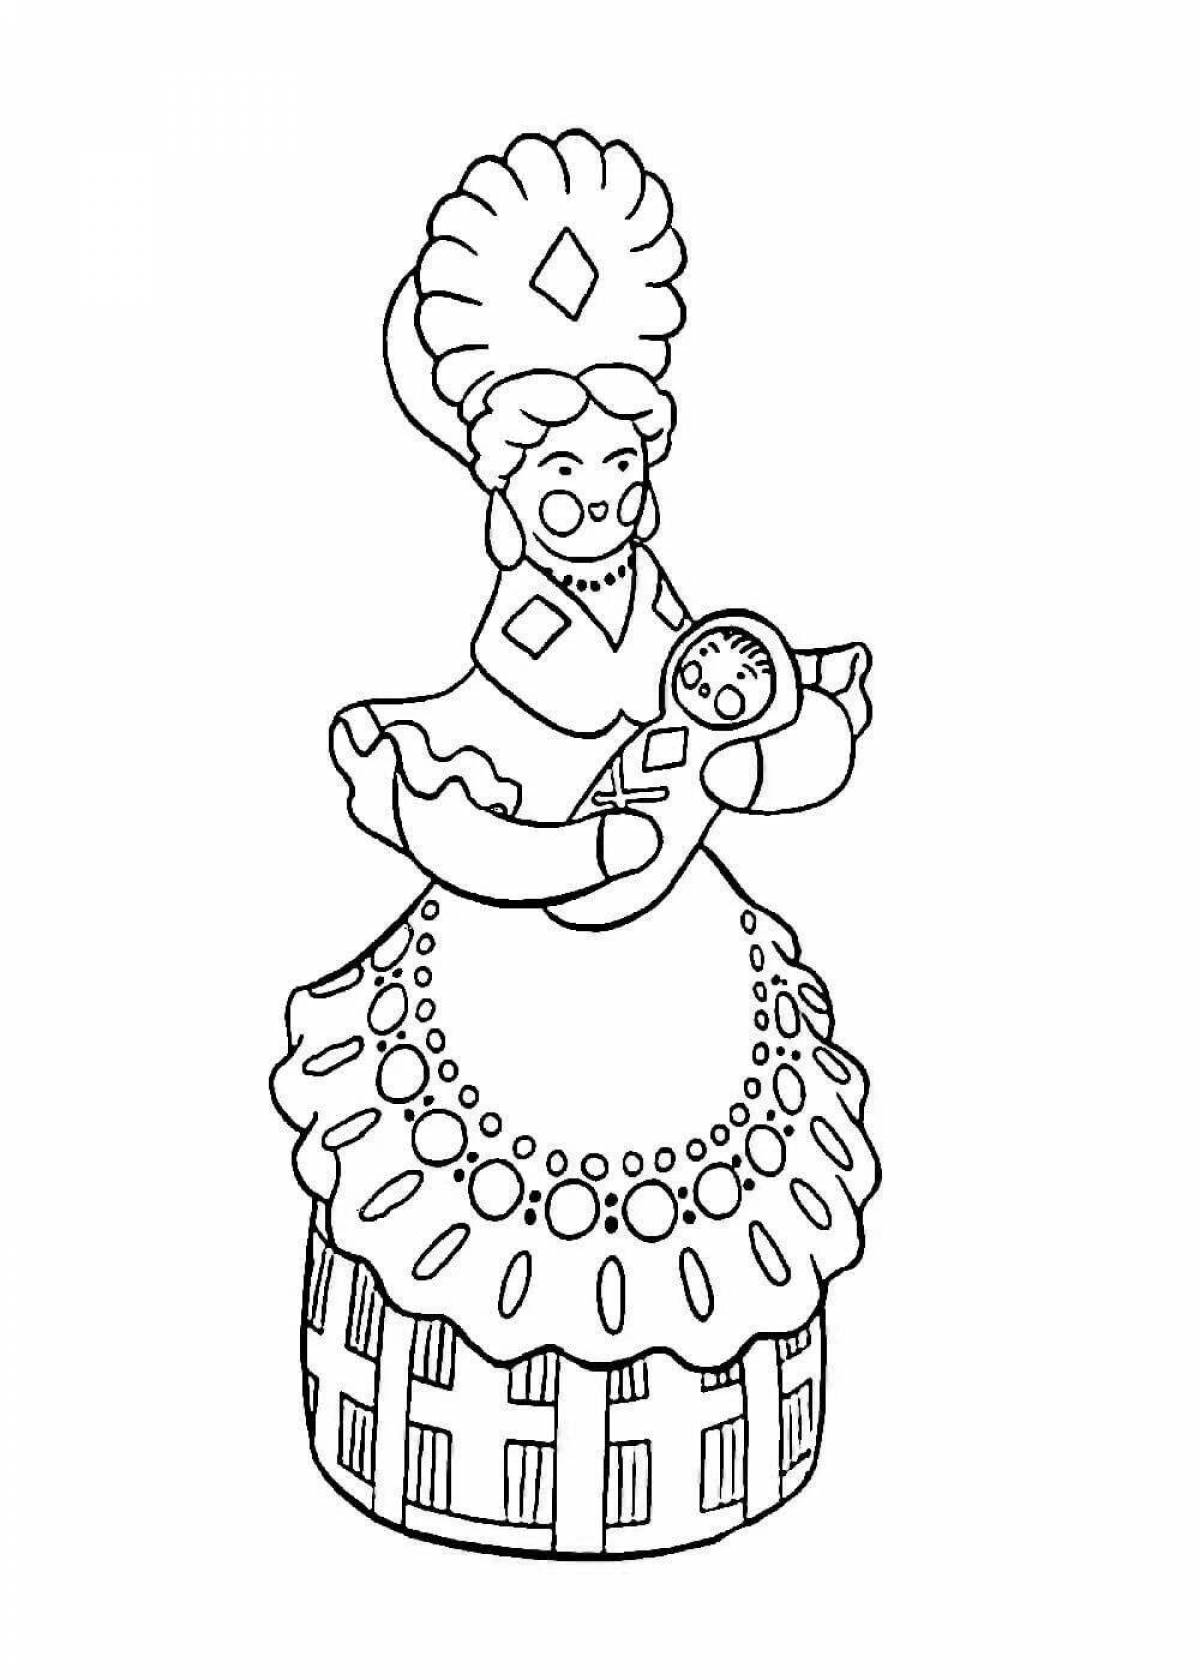 Coloring quirky Dymkovo doll